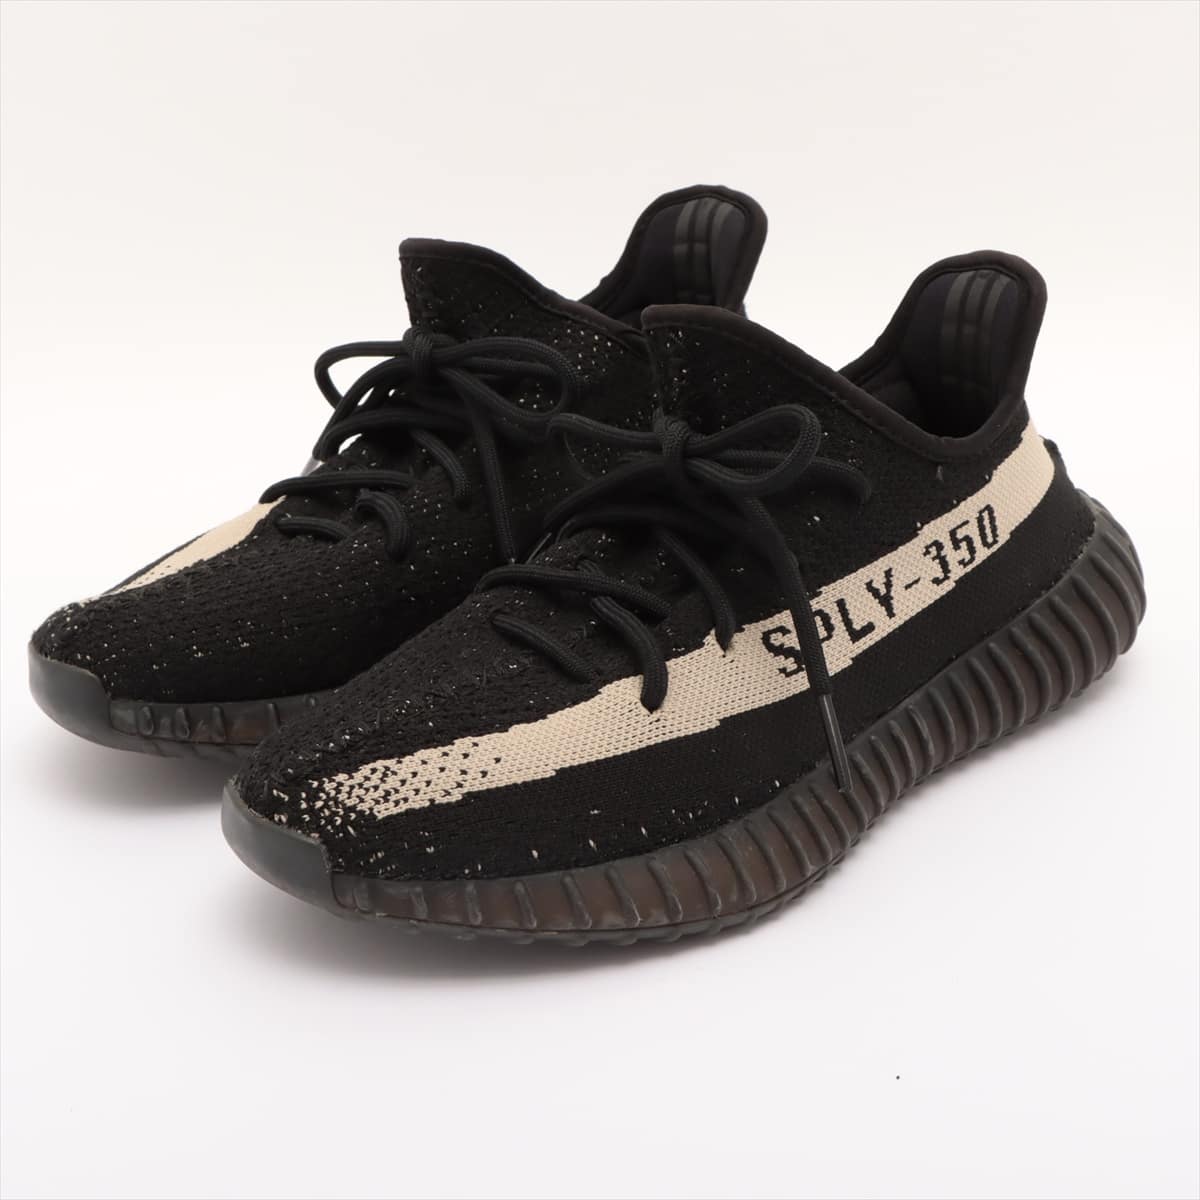 Adidas YEEZY BOOST 350 V2 Knit Sneakers 26.5㎝ Men's Black OREO BY1604